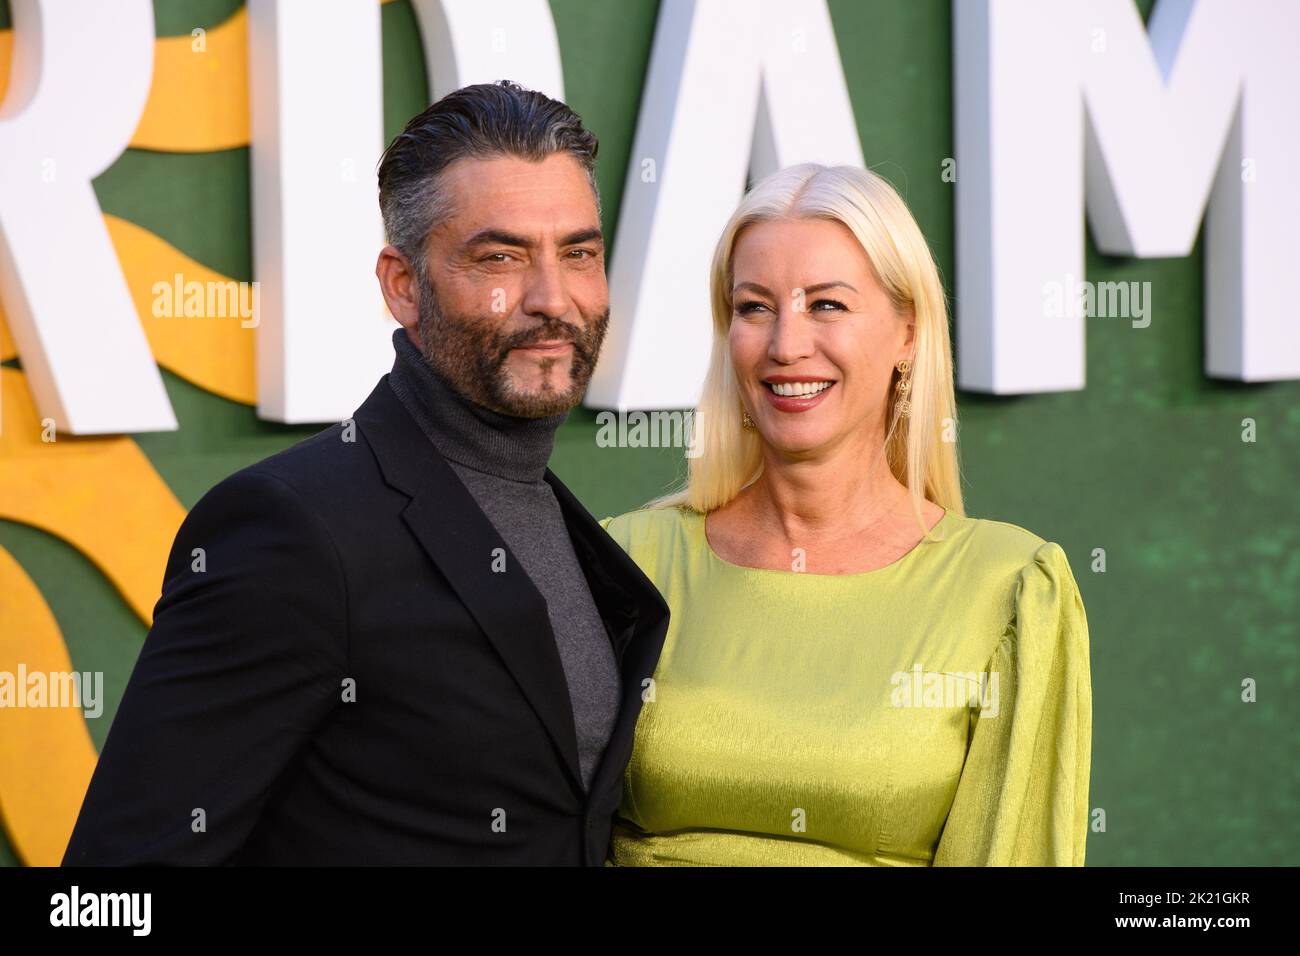 London, UK. 21 September 2022. Denise van Outen and Jimmy Barba attending the European premiere of Amsterdam at the Odeon Luxe Leicester Square Cinema, London Picture date: Thursday September 21, 2022. Photo credit should read: Matt Crossick/Empics/Alamy Live News Stock Photo